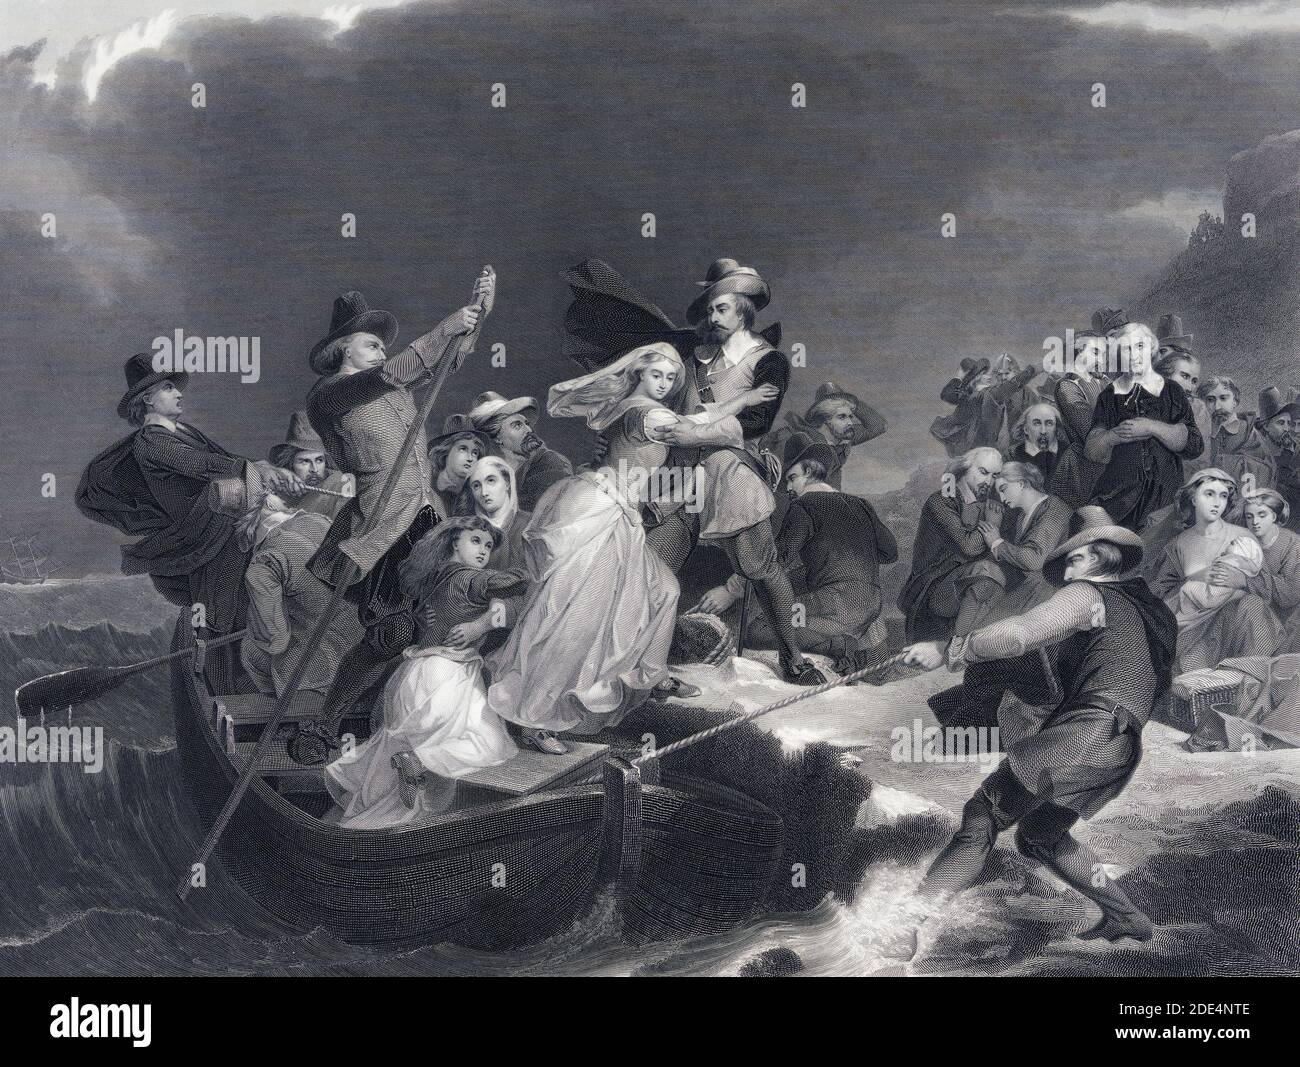 Print showing a woman being helped ashore from a small boat held in position against a rock or ledge by men with ropes and poles; in the background on the right, other Pilgrims kneel in prayer. Stock Photo